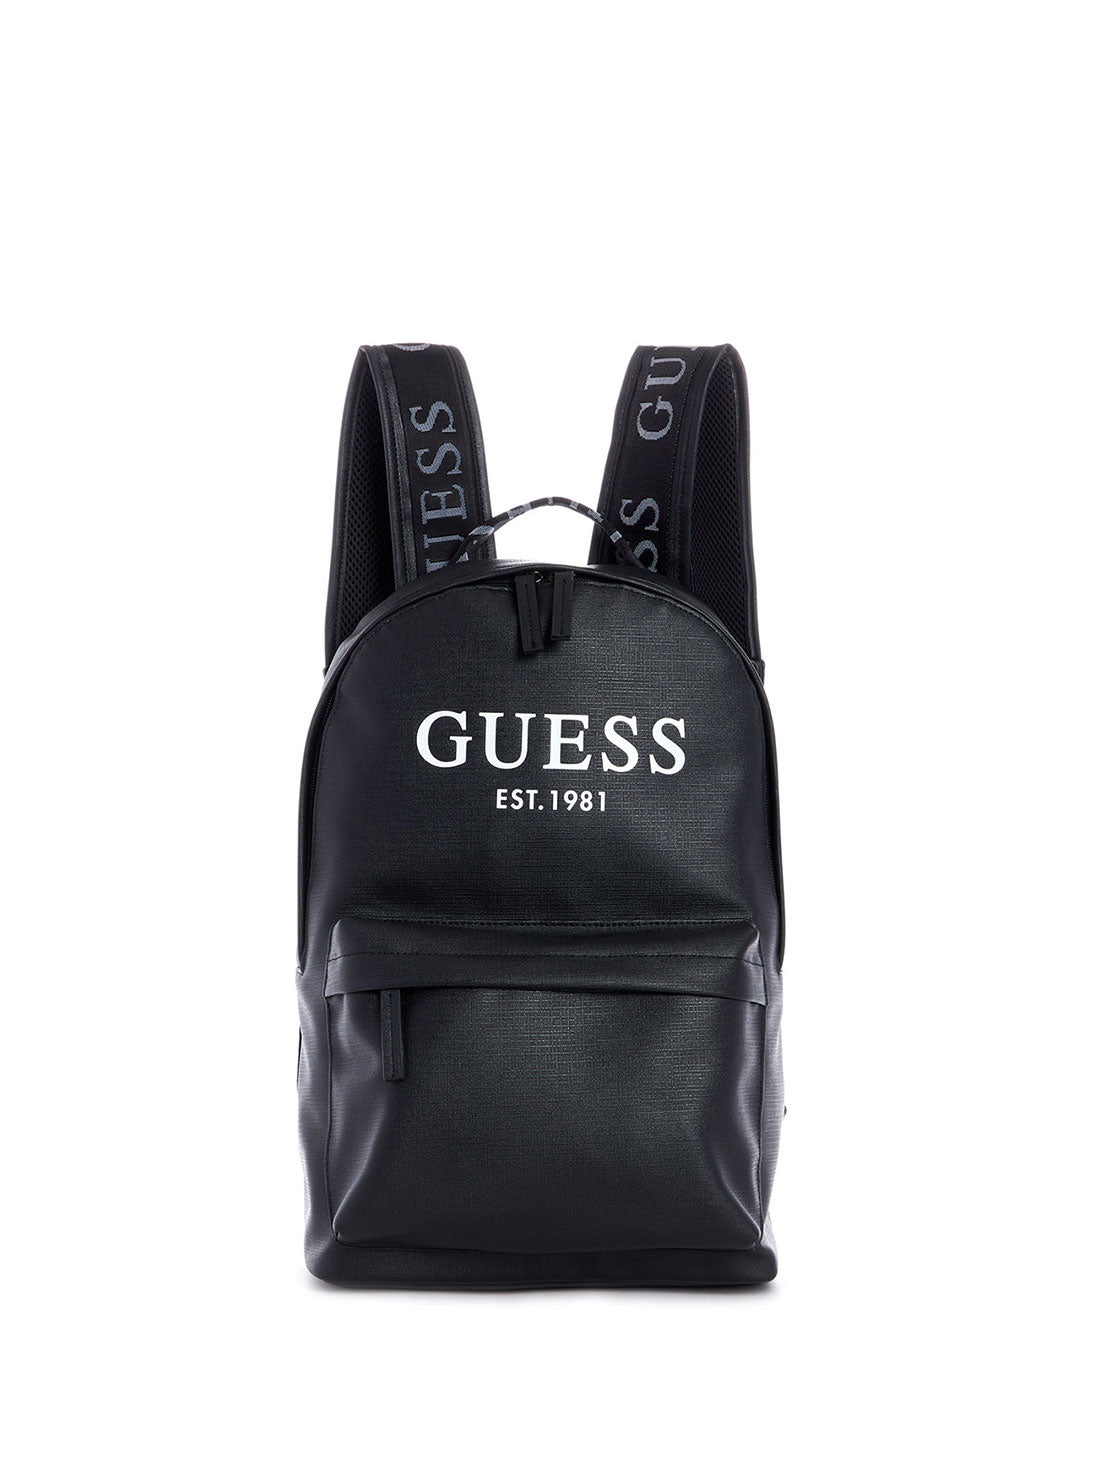 GUESS Men's Black Logo Outfitter Backpack VY753598 Front View